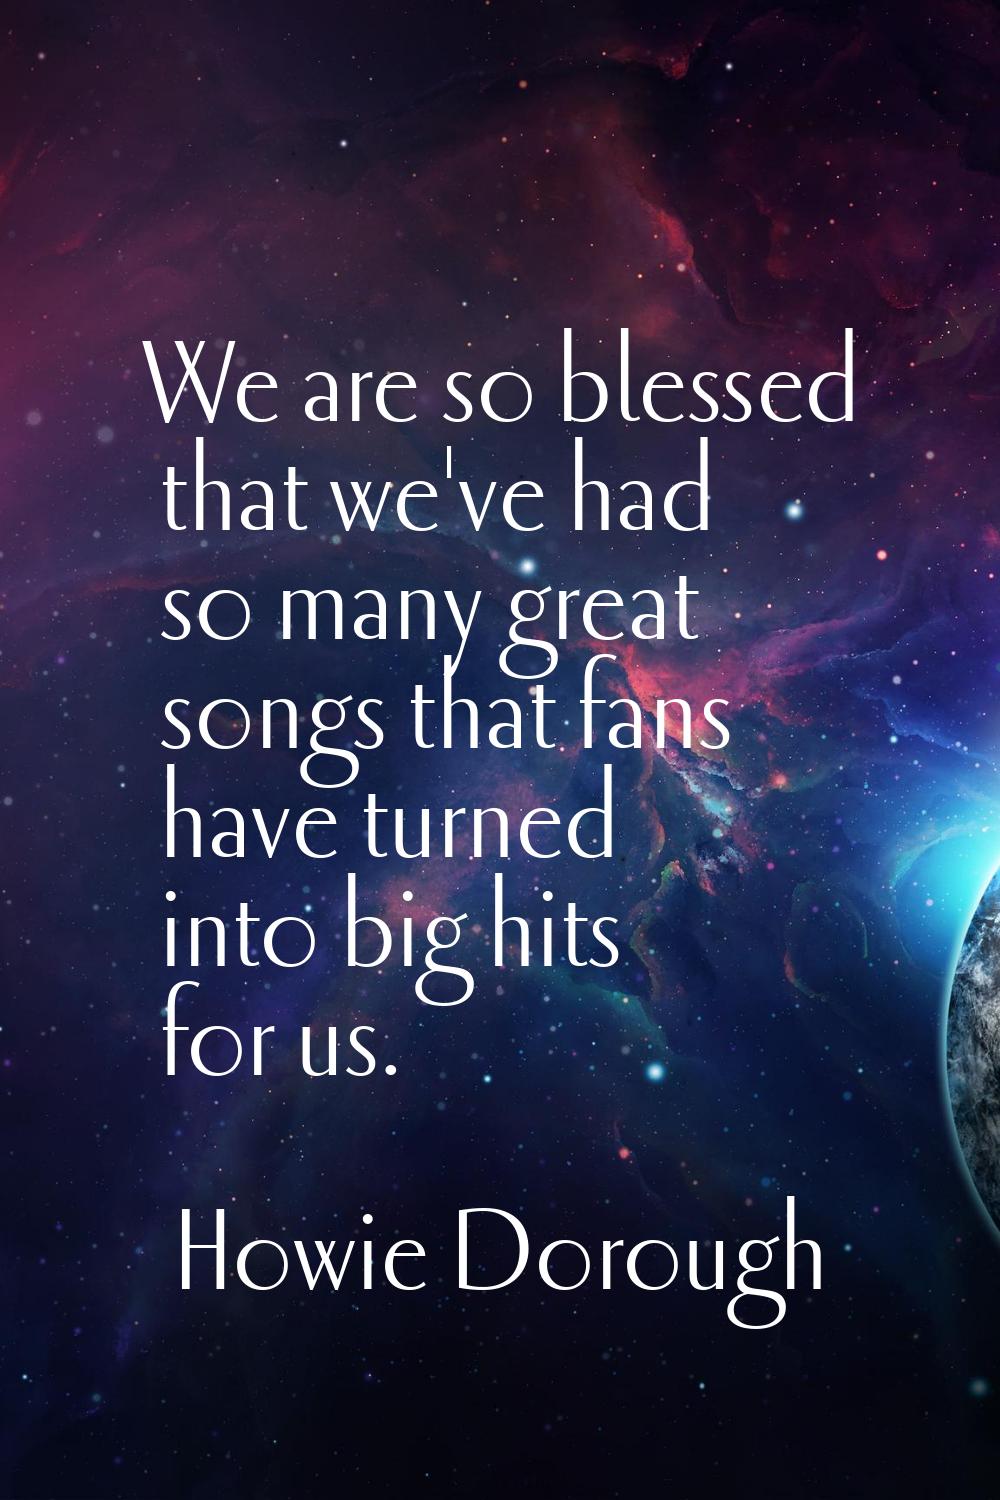 We are so blessed that we've had so many great songs that fans have turned into big hits for us.